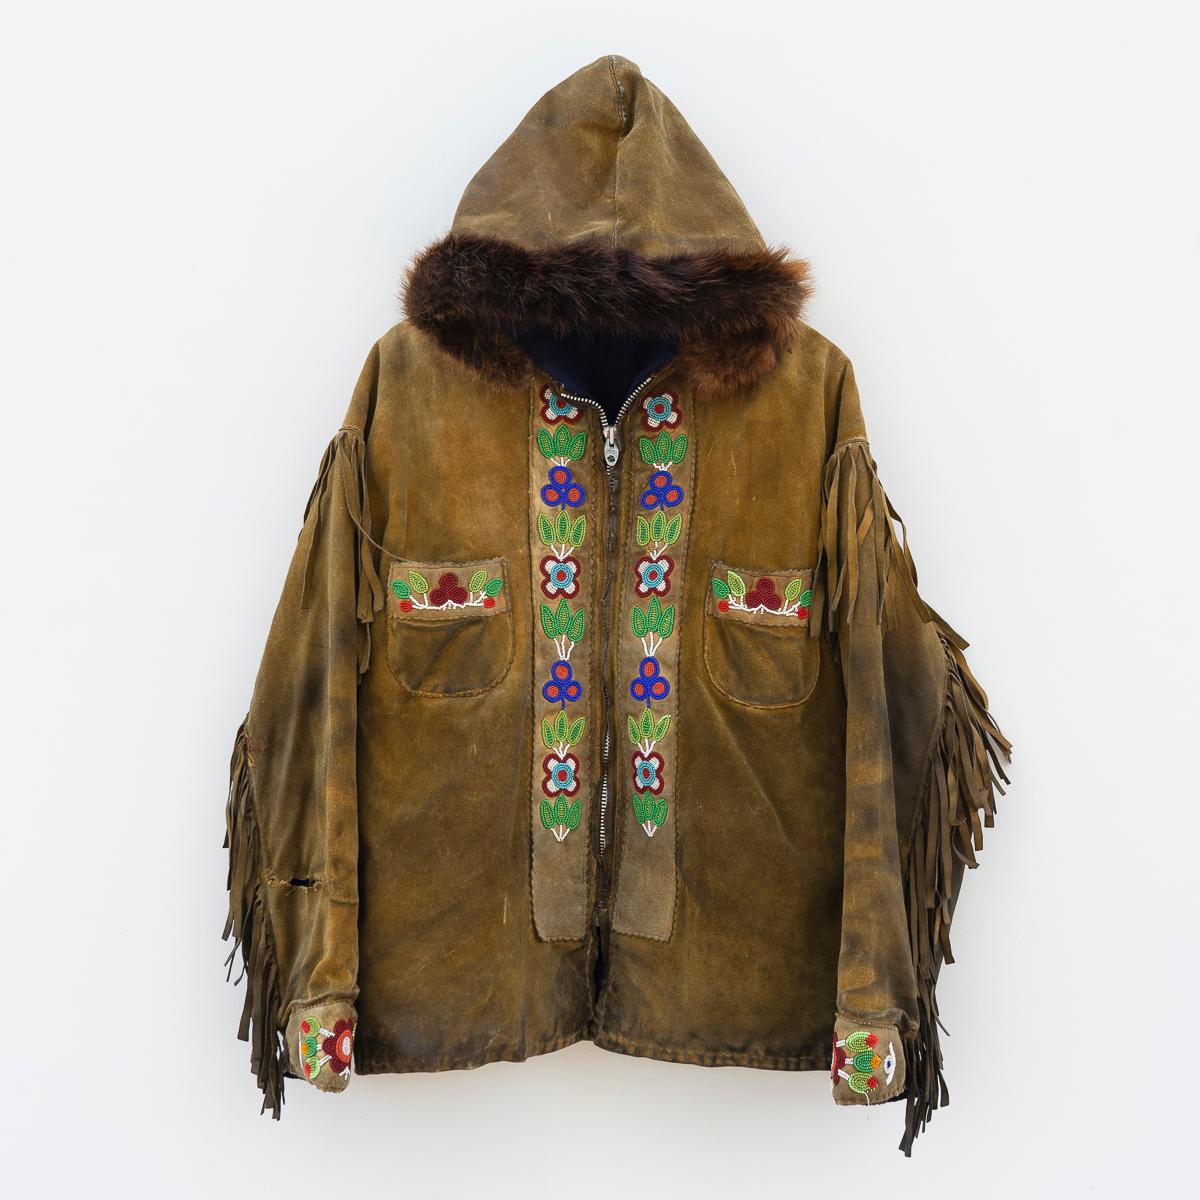 TRADITIONAL OJIBWAY TRIBAL COAT WITH FLORAL BEAD DETAILING
Originating from the Ojibwe (Ojibwa) people from what is currently Southern Canada and the North Mid-Western United States.

Handmade from smoked moose leather with tassel